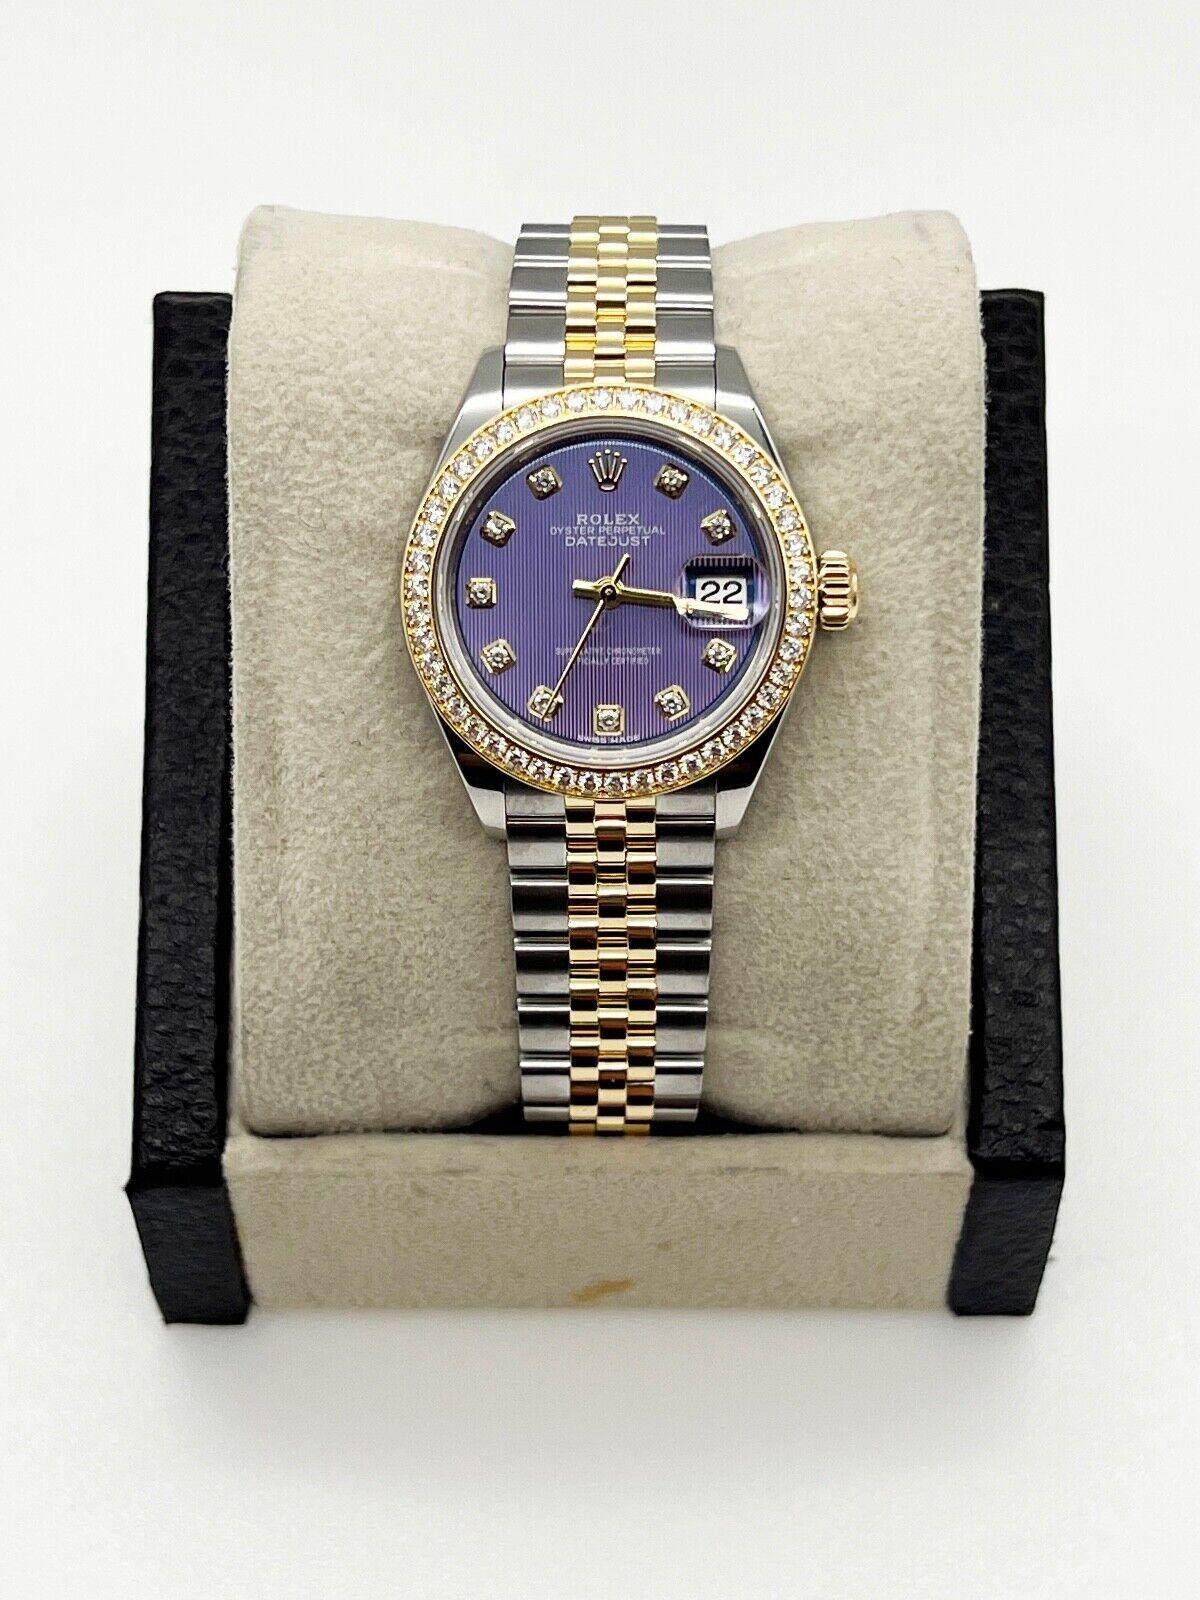 Style Number: 279383RBR



Serial: 31R69***



Year: 2017

 

Model: Ladies Datejust

 

Case Material: Stainless Steel 

  

Band: 18K Yellow Gold & Stainless Steel 

  

Bezel: Original Factory Diamond Bezel

 

Dial: Original Factory Lavander